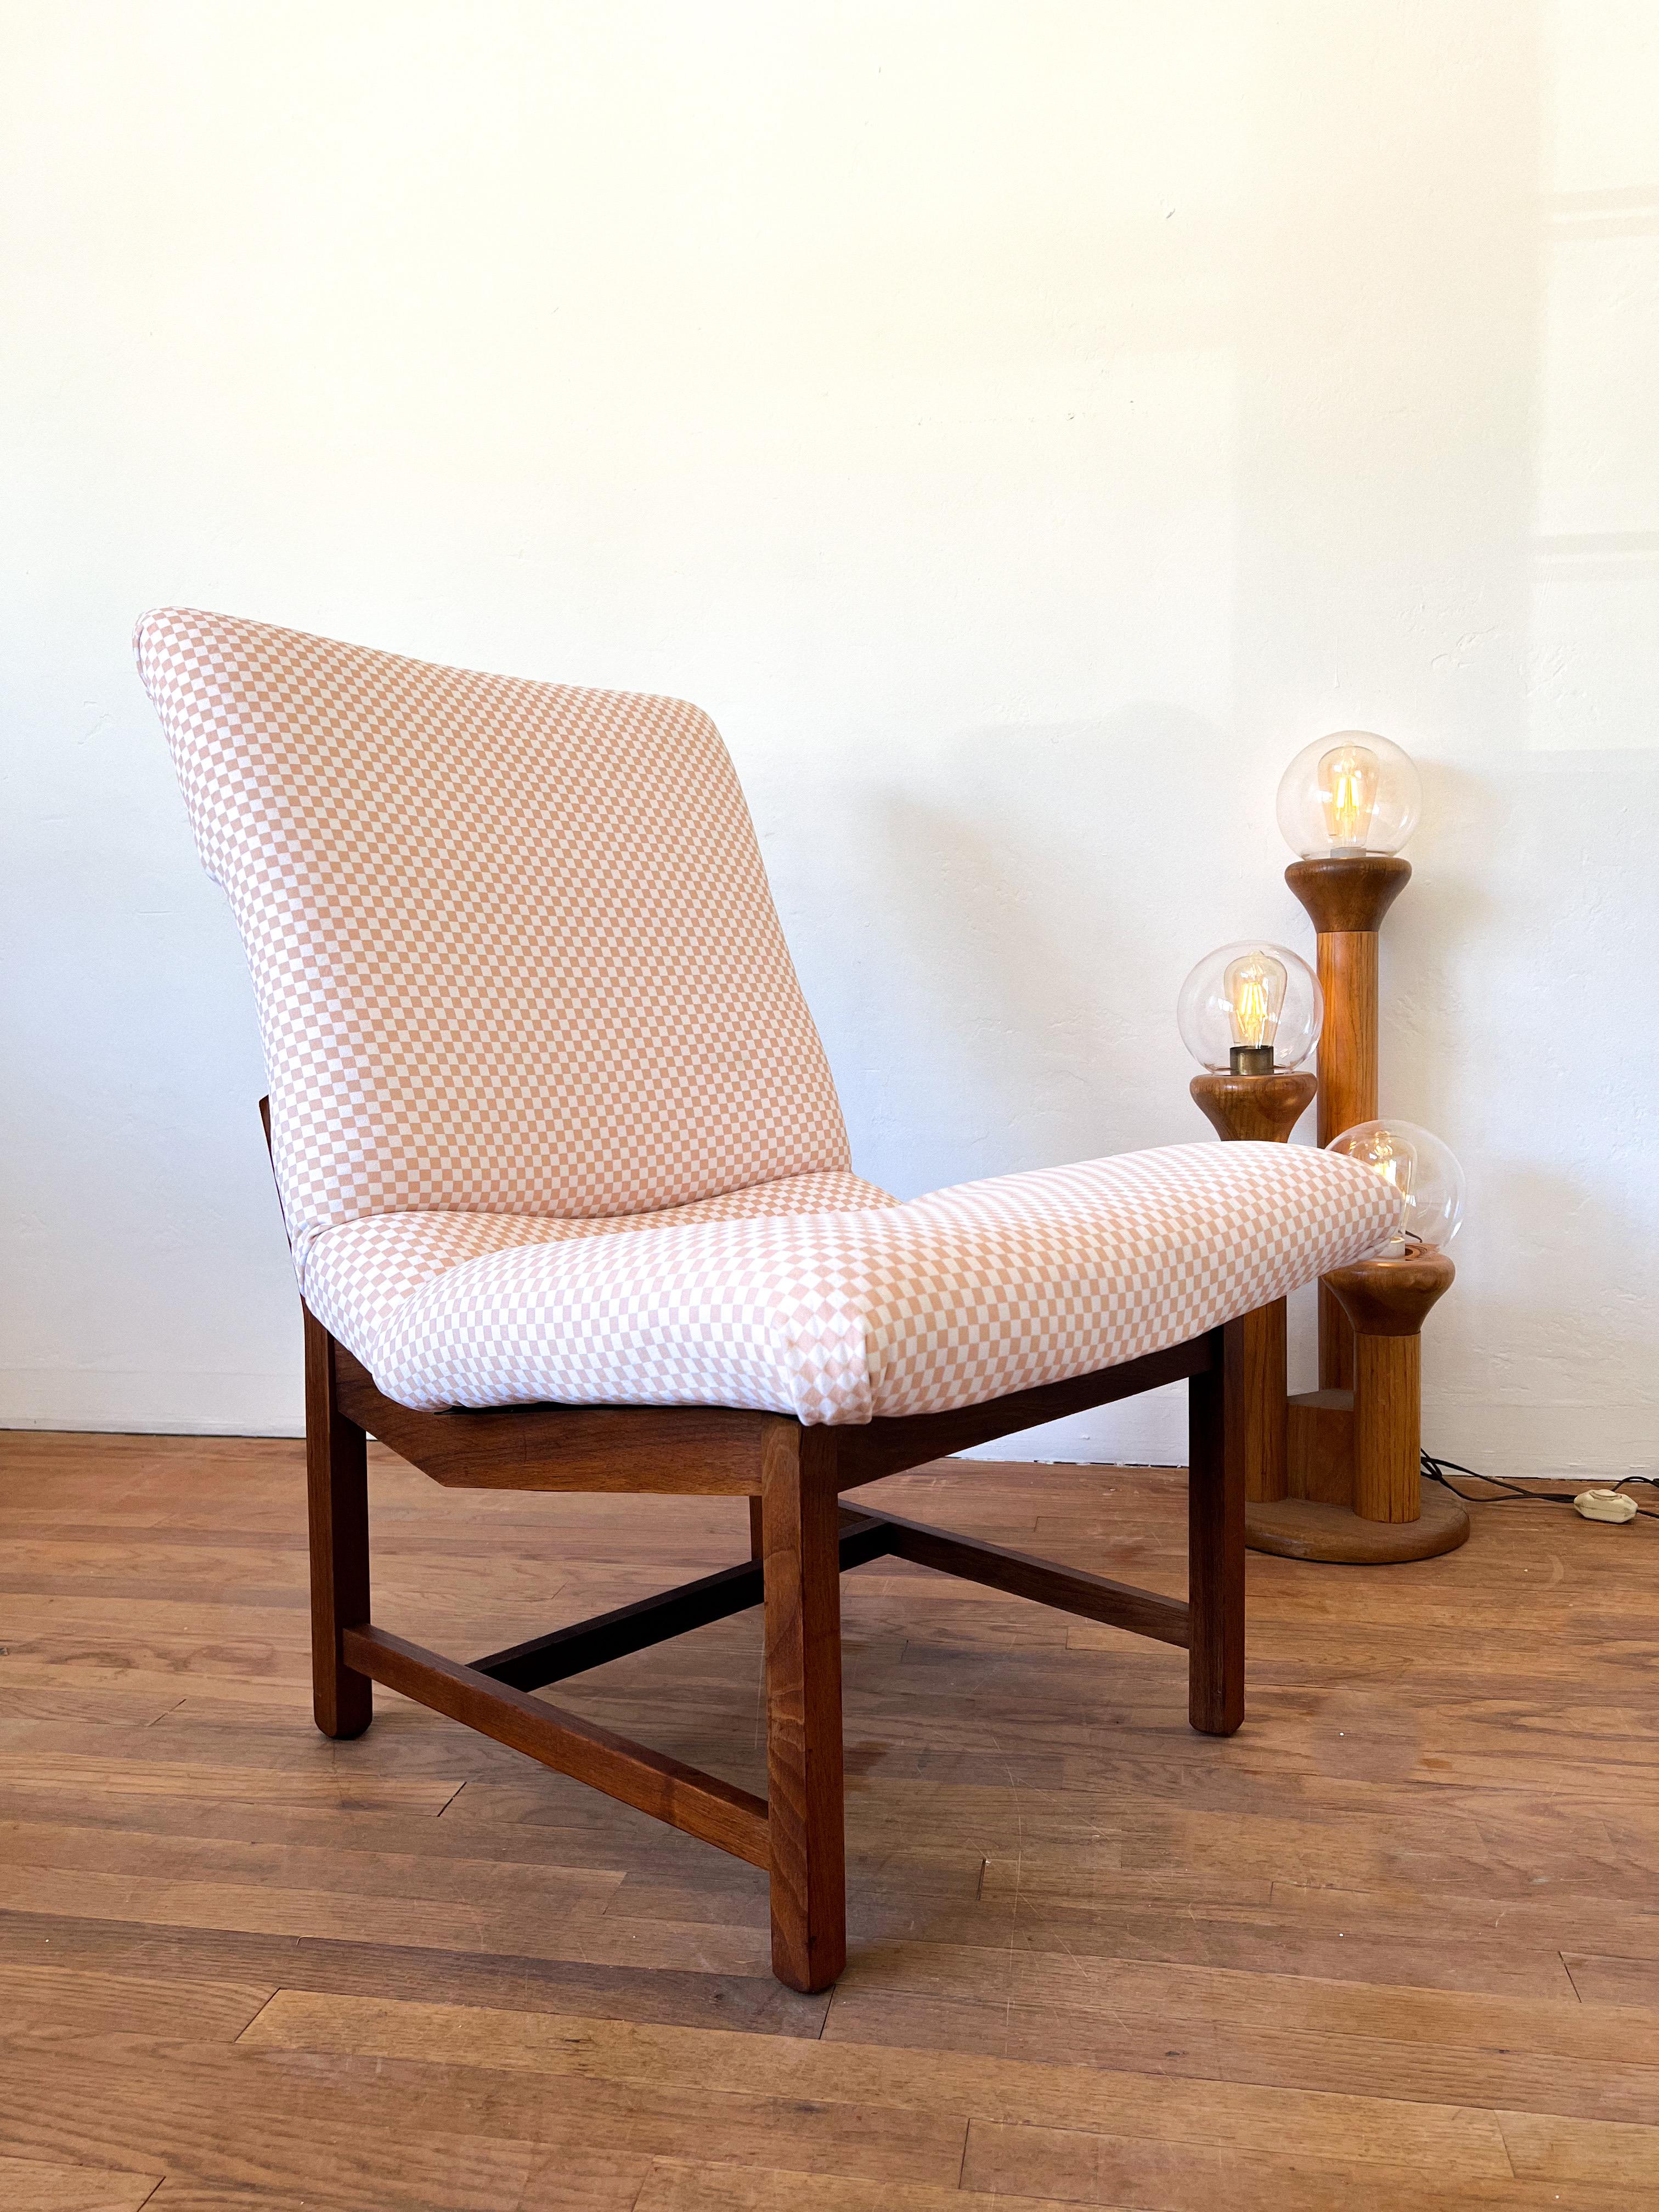 Late 20th Century Mid-Century Modern Jens Risom Style Slipper Chair For Sale